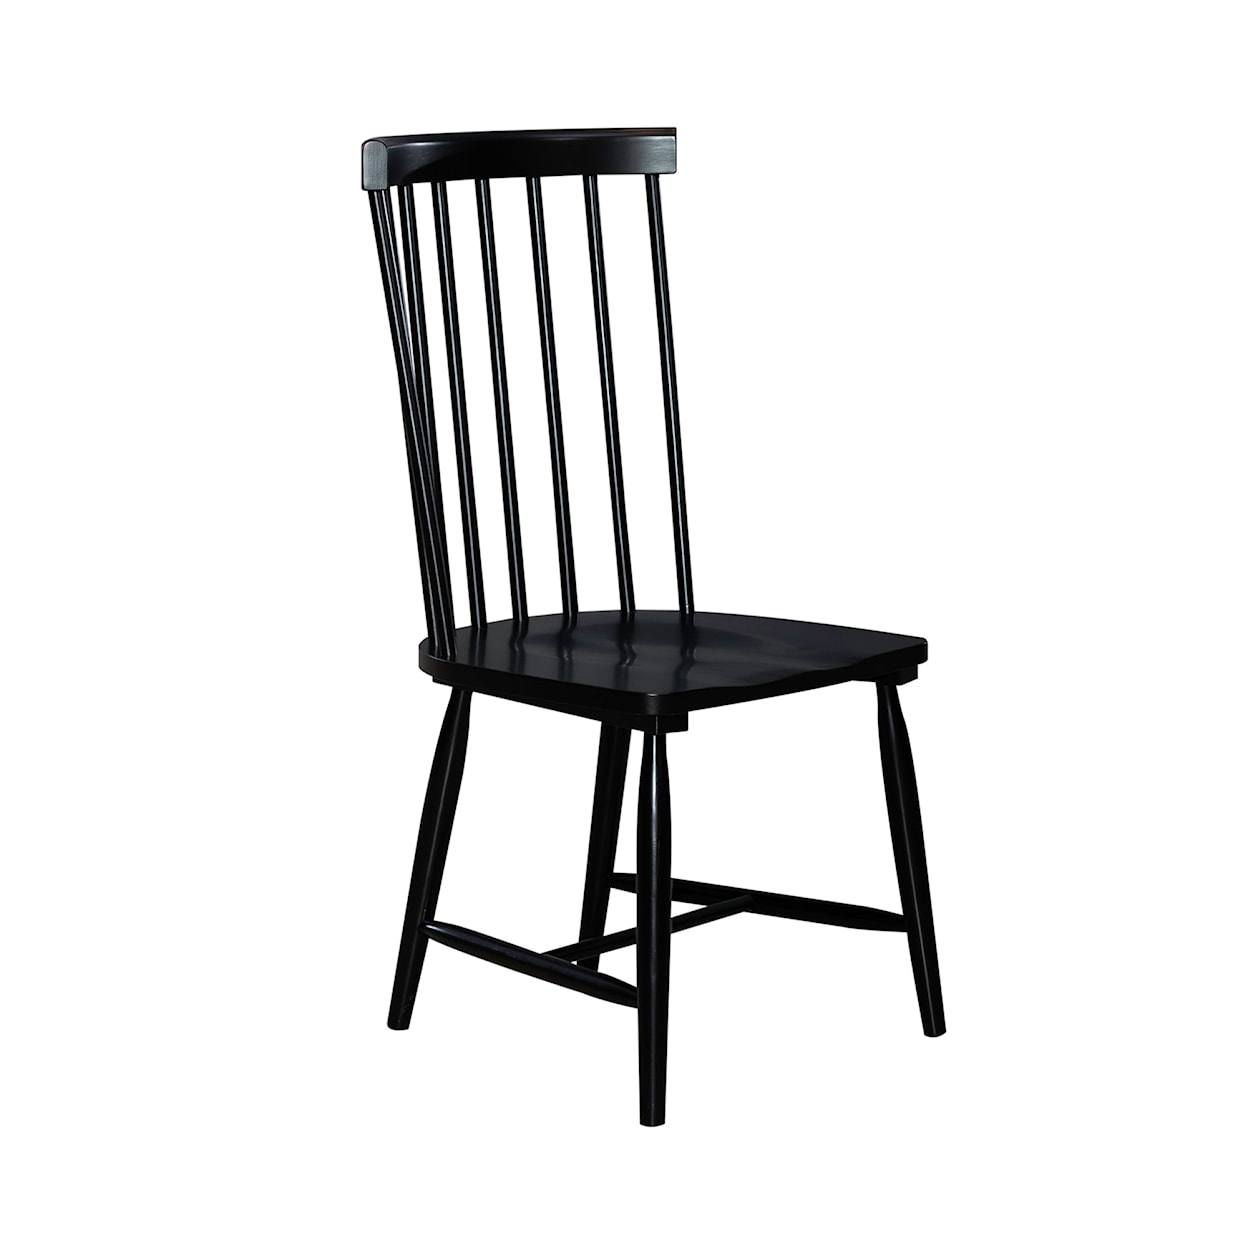 Liberty Furniture Capeside Cottage Spindle Back Side Chair